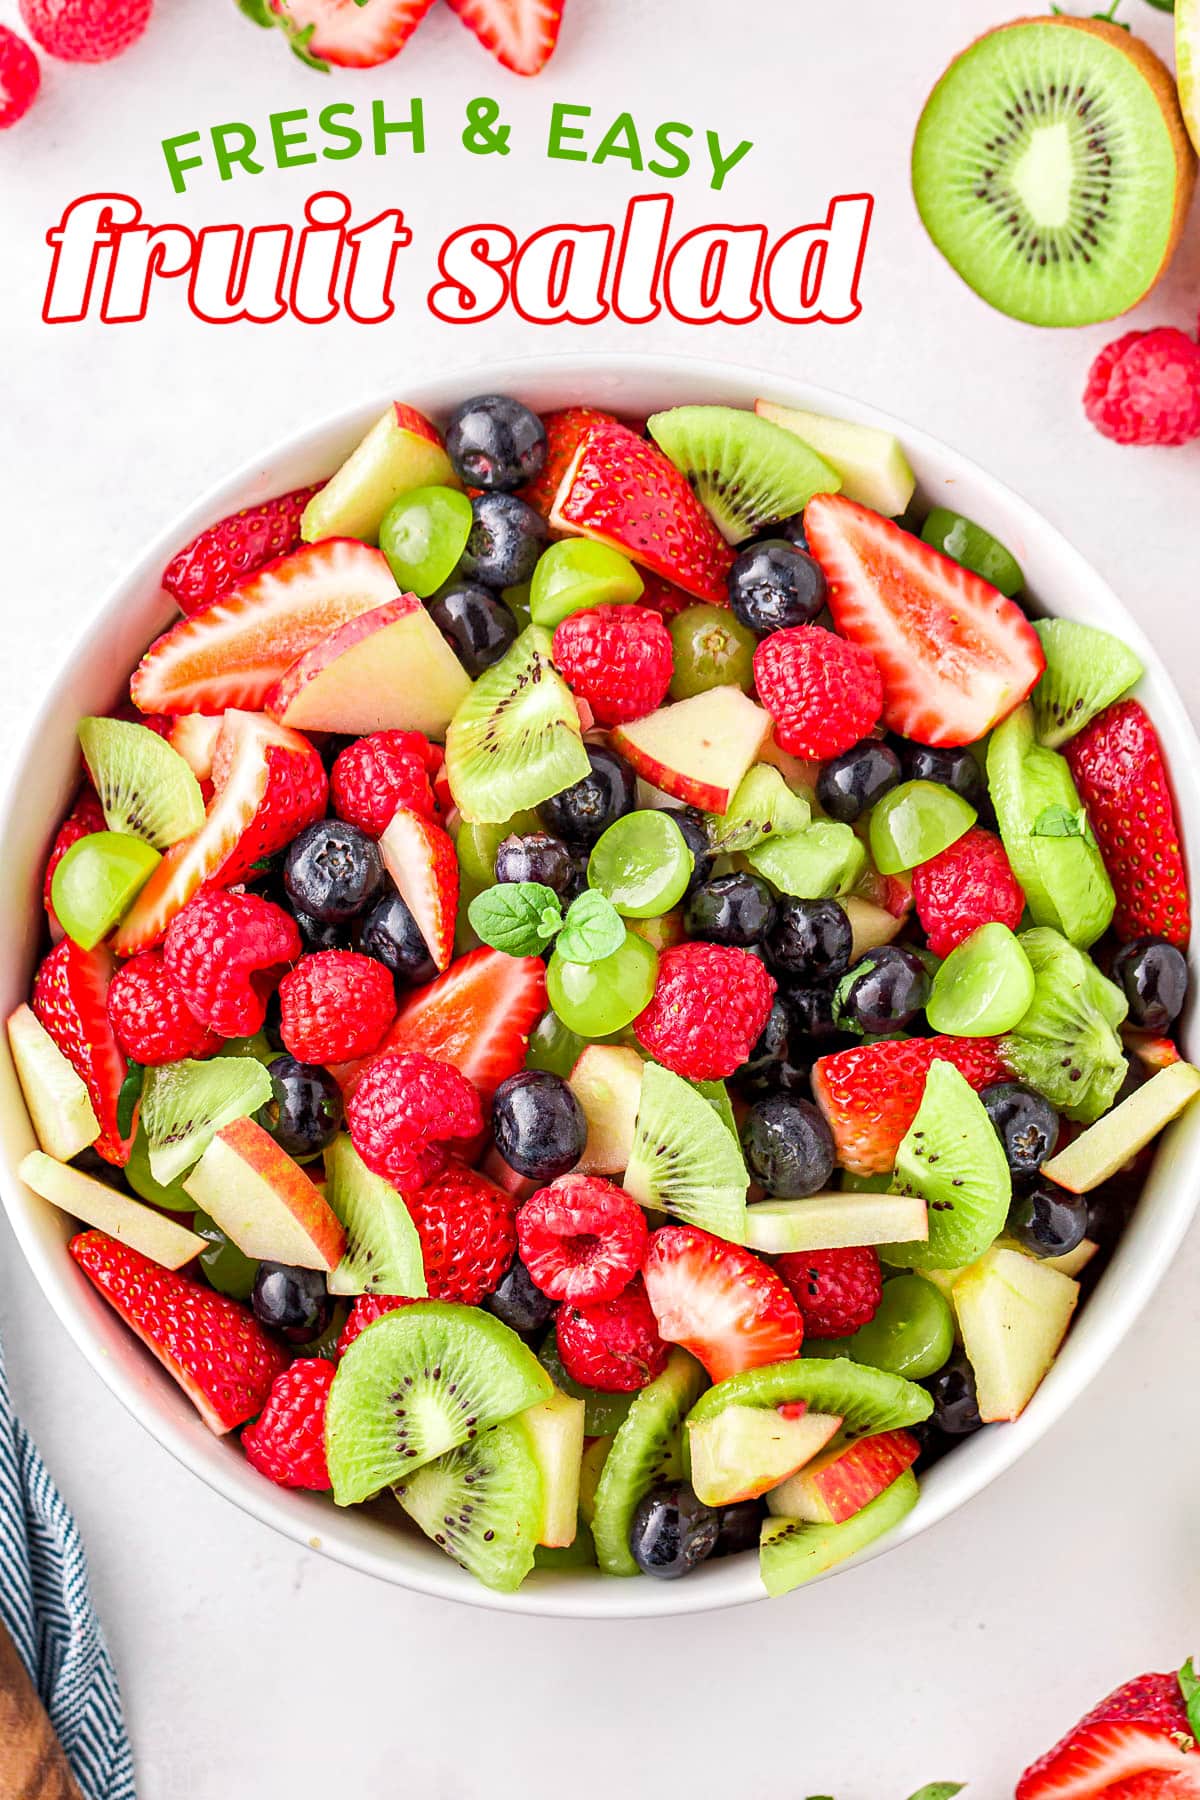 fruit salad in white bowl ready to serve with title overlay at top of image. fruit salad has kiwis, strawberries grapes and more.